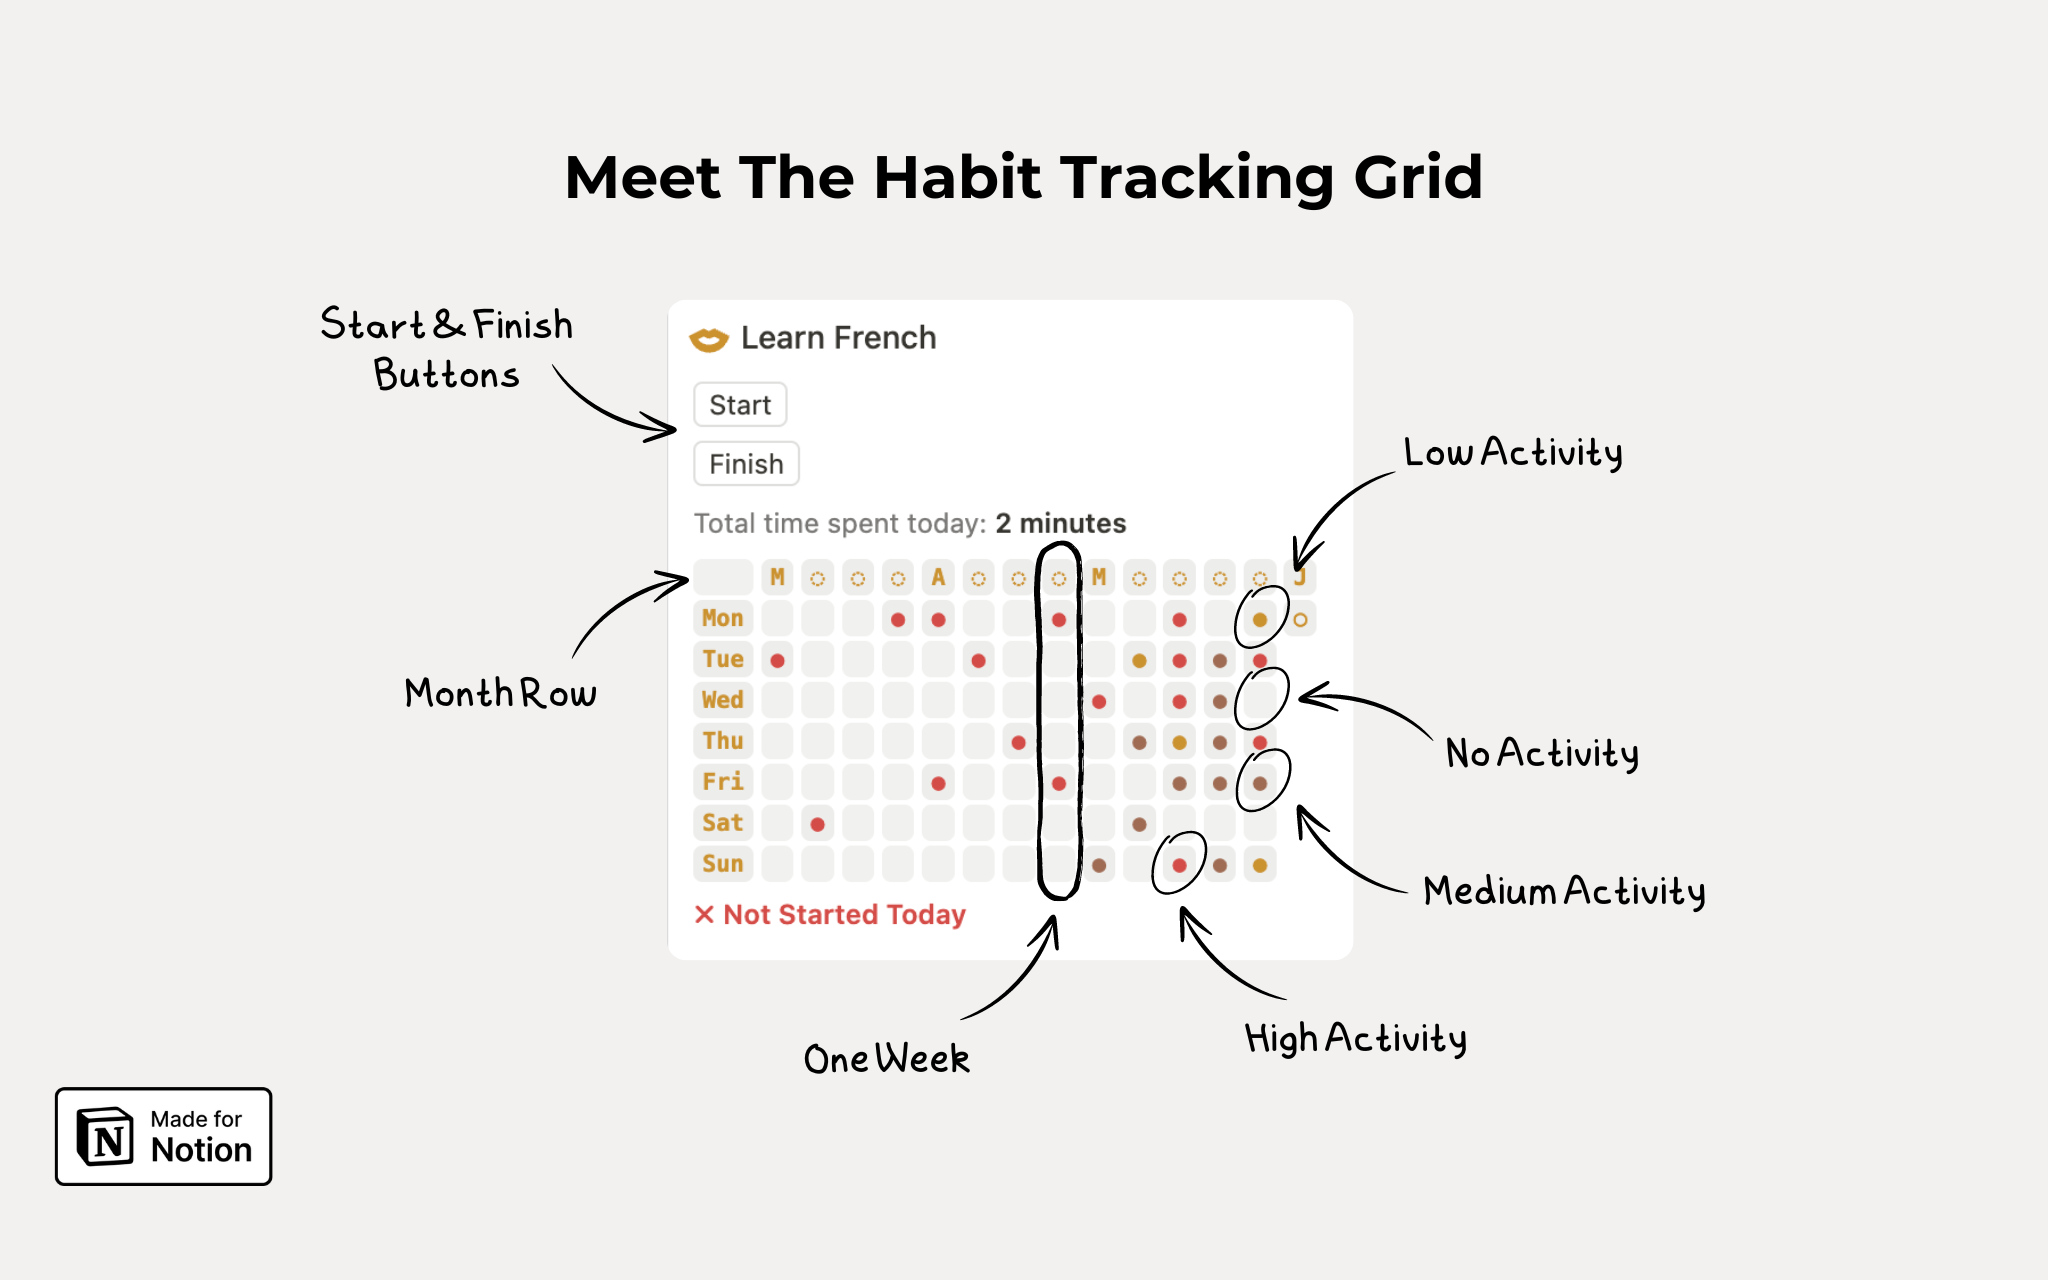 Track your habits and time easily with our unique Heatmap Grid! One-Click habit tracking to build a better you. Set goals, log your progress, and watch your streaks grow. No more excuses – start building the life you want, one click at a time.